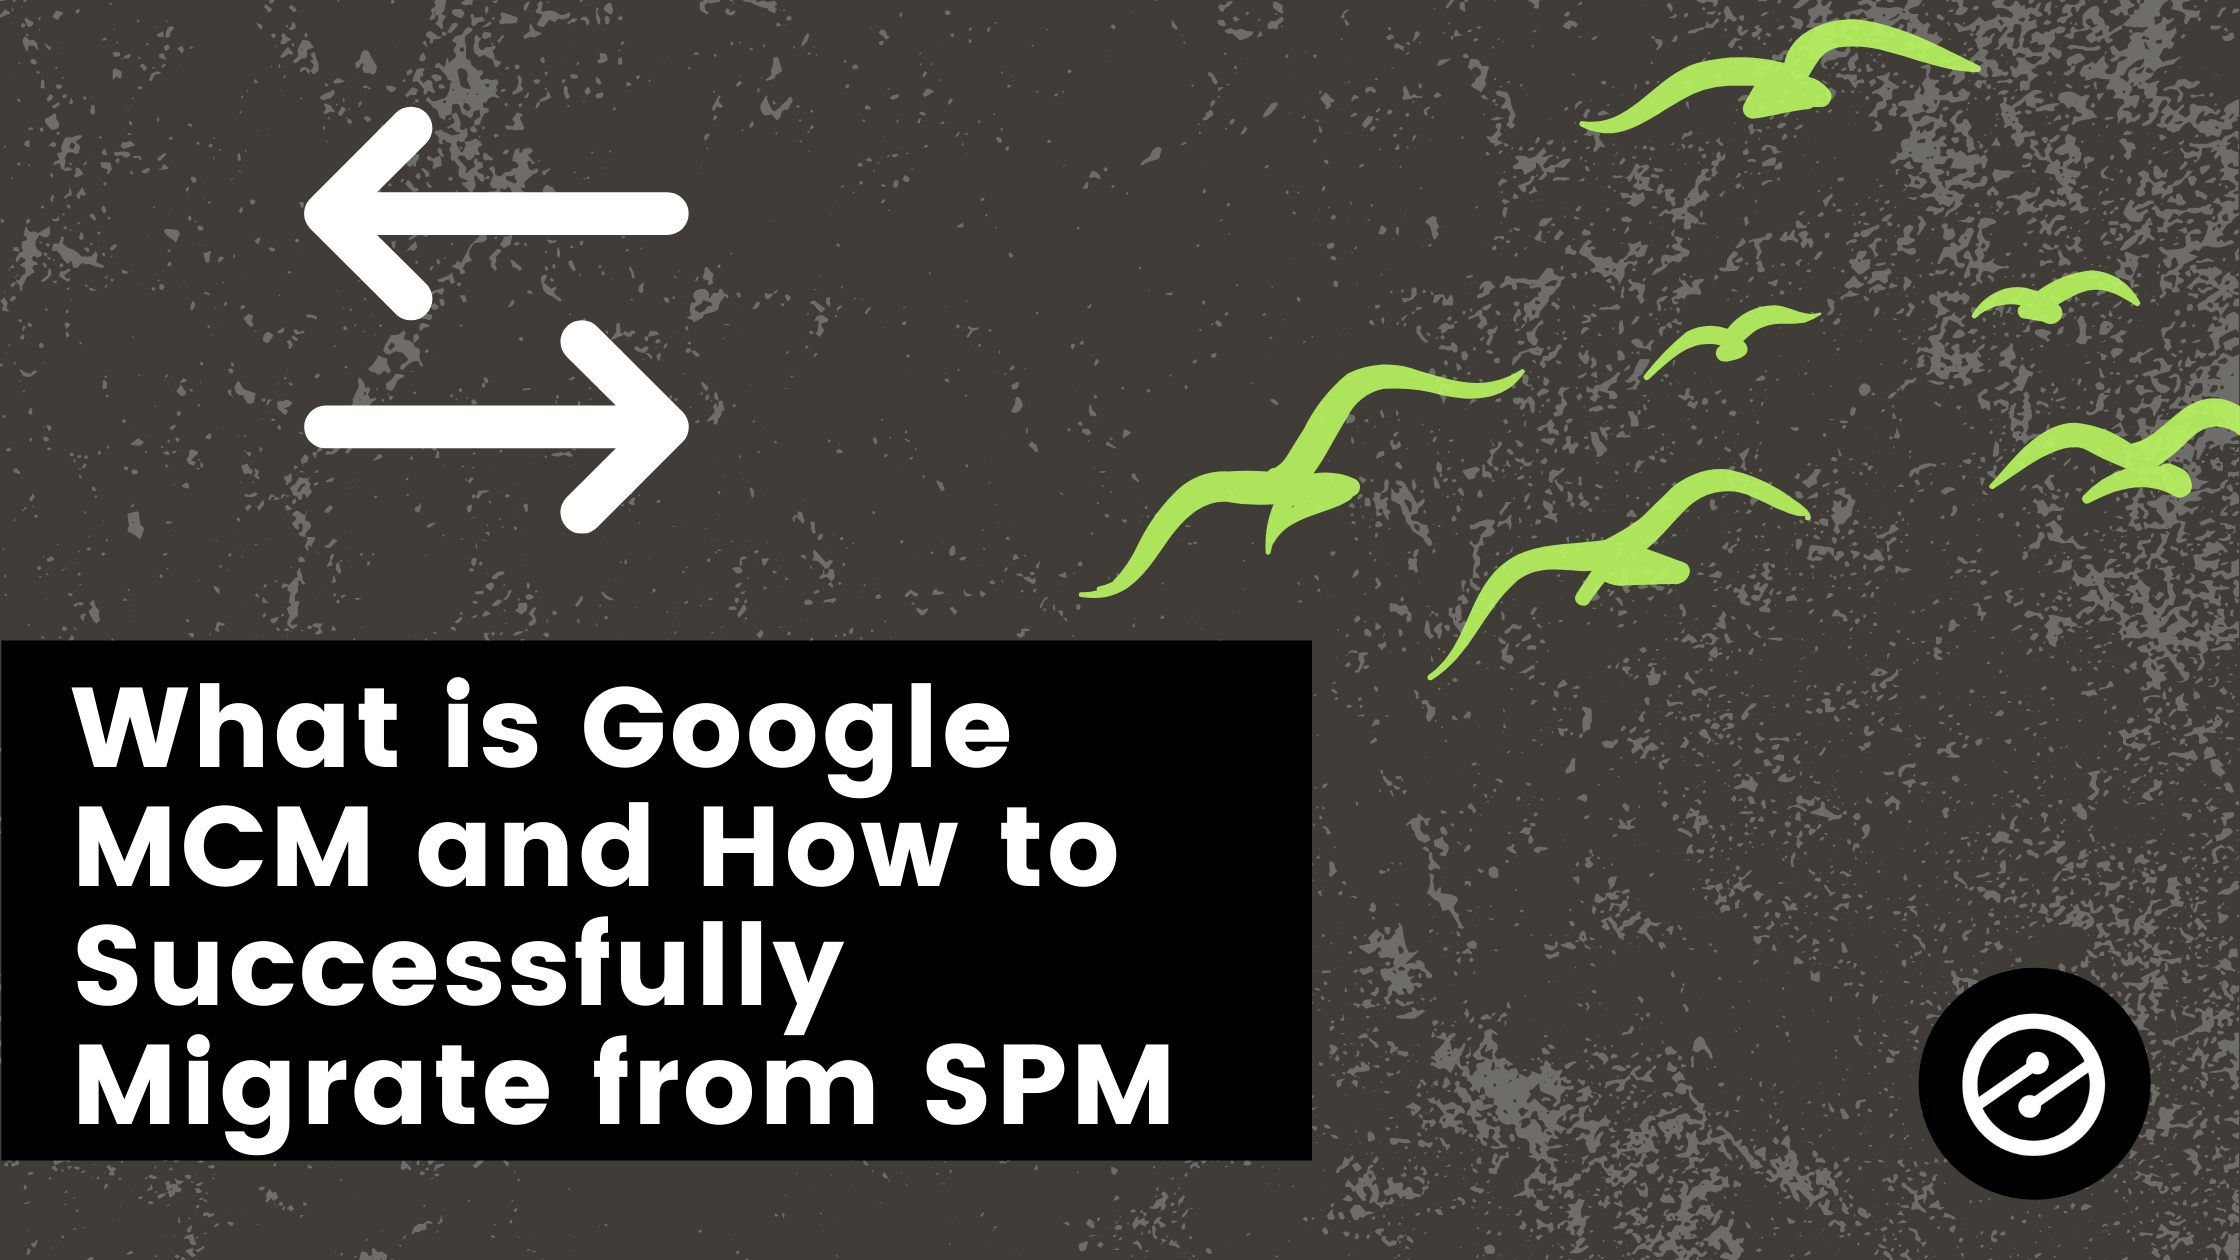 What is Google MCM and How to Successfully Migrate from SPM